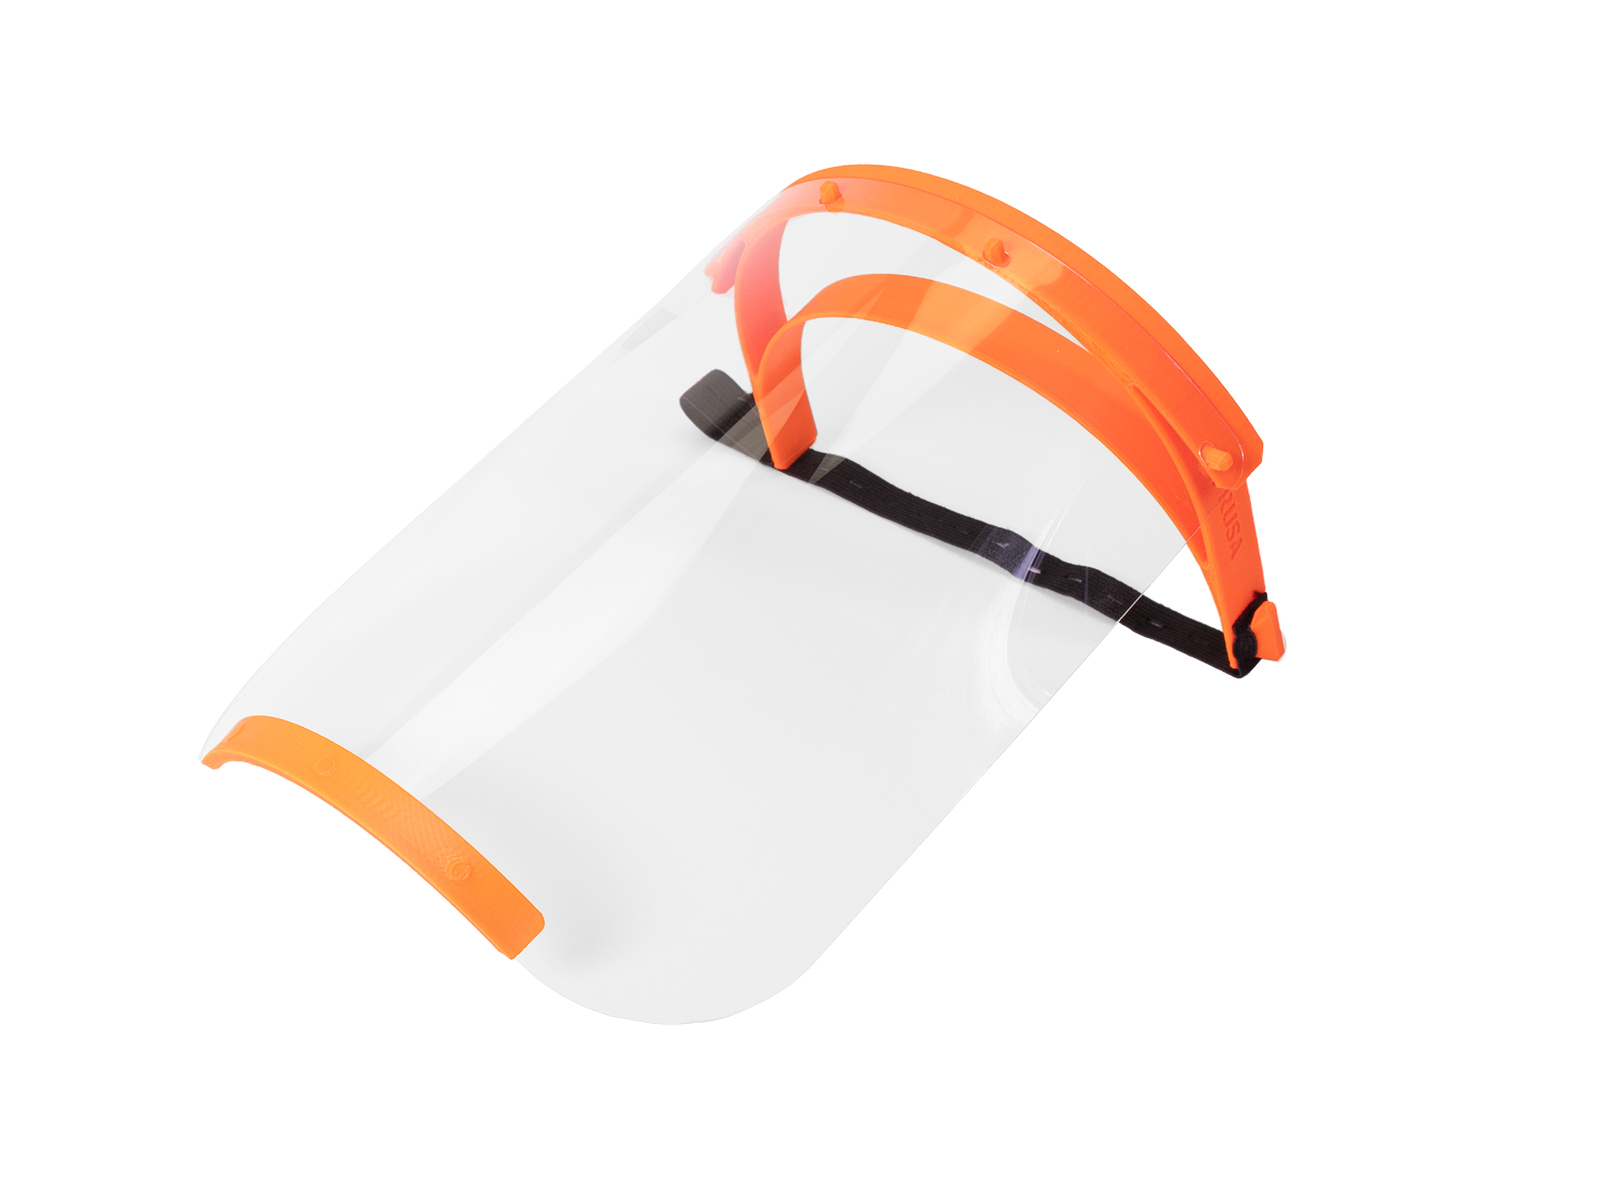 A completed face shield using a 3D printed headband. Click image to download hi-res version.
